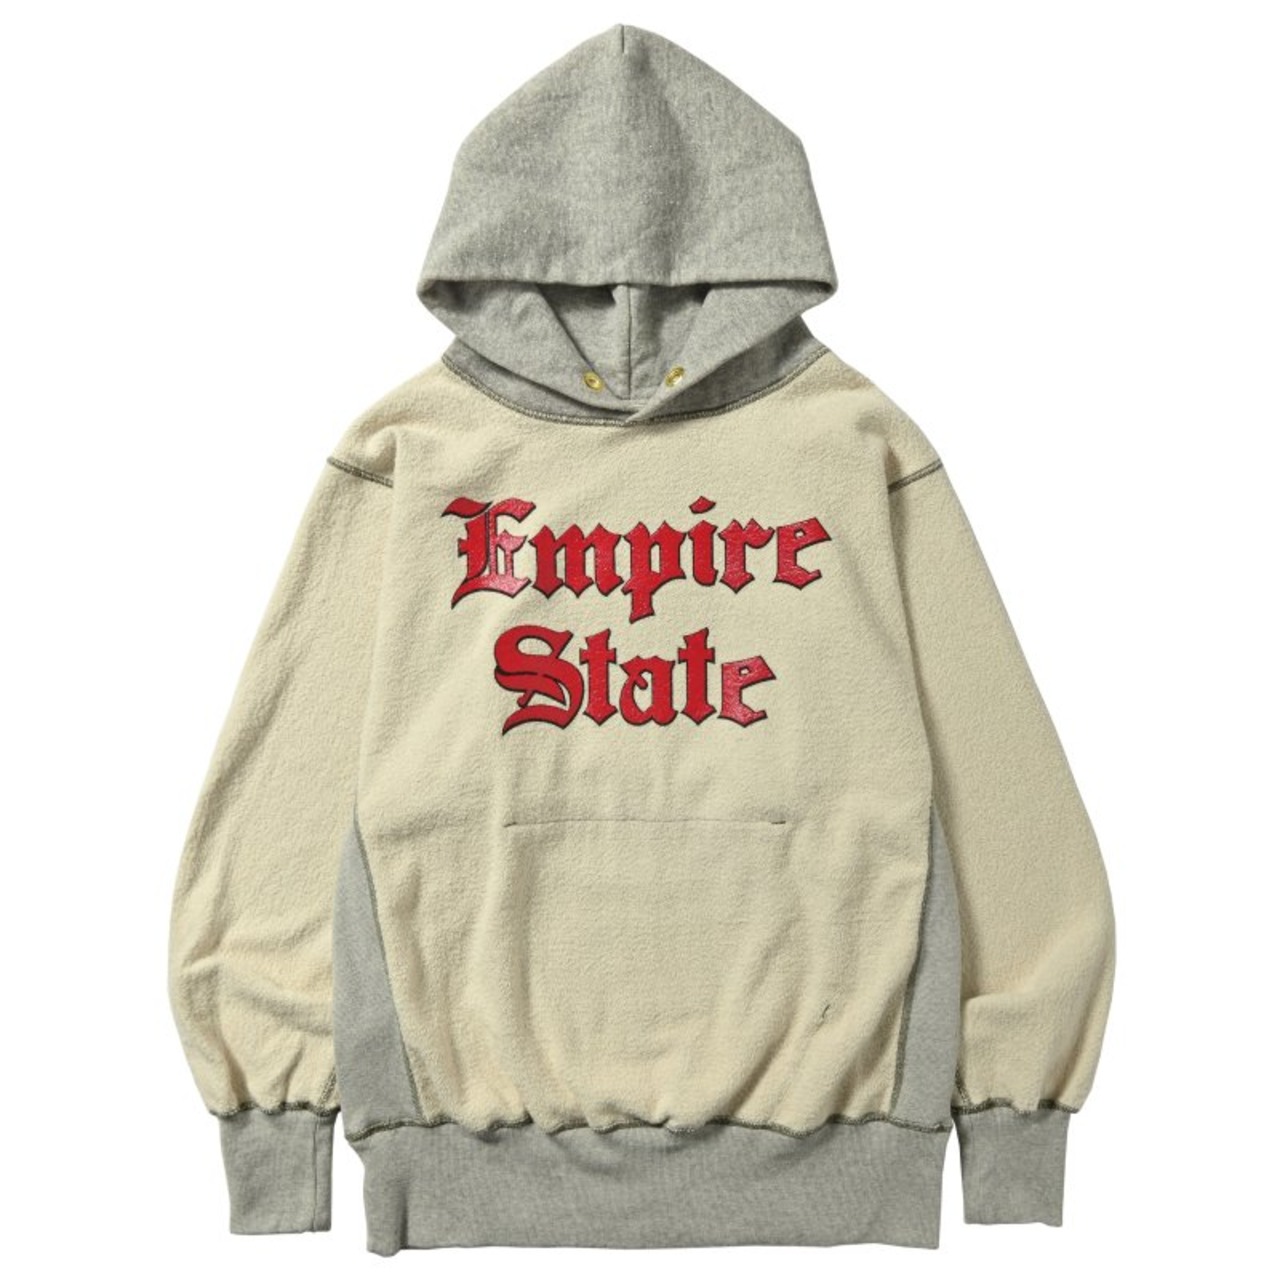 BACKSIDE OF EMPIRE STATE HOODIE